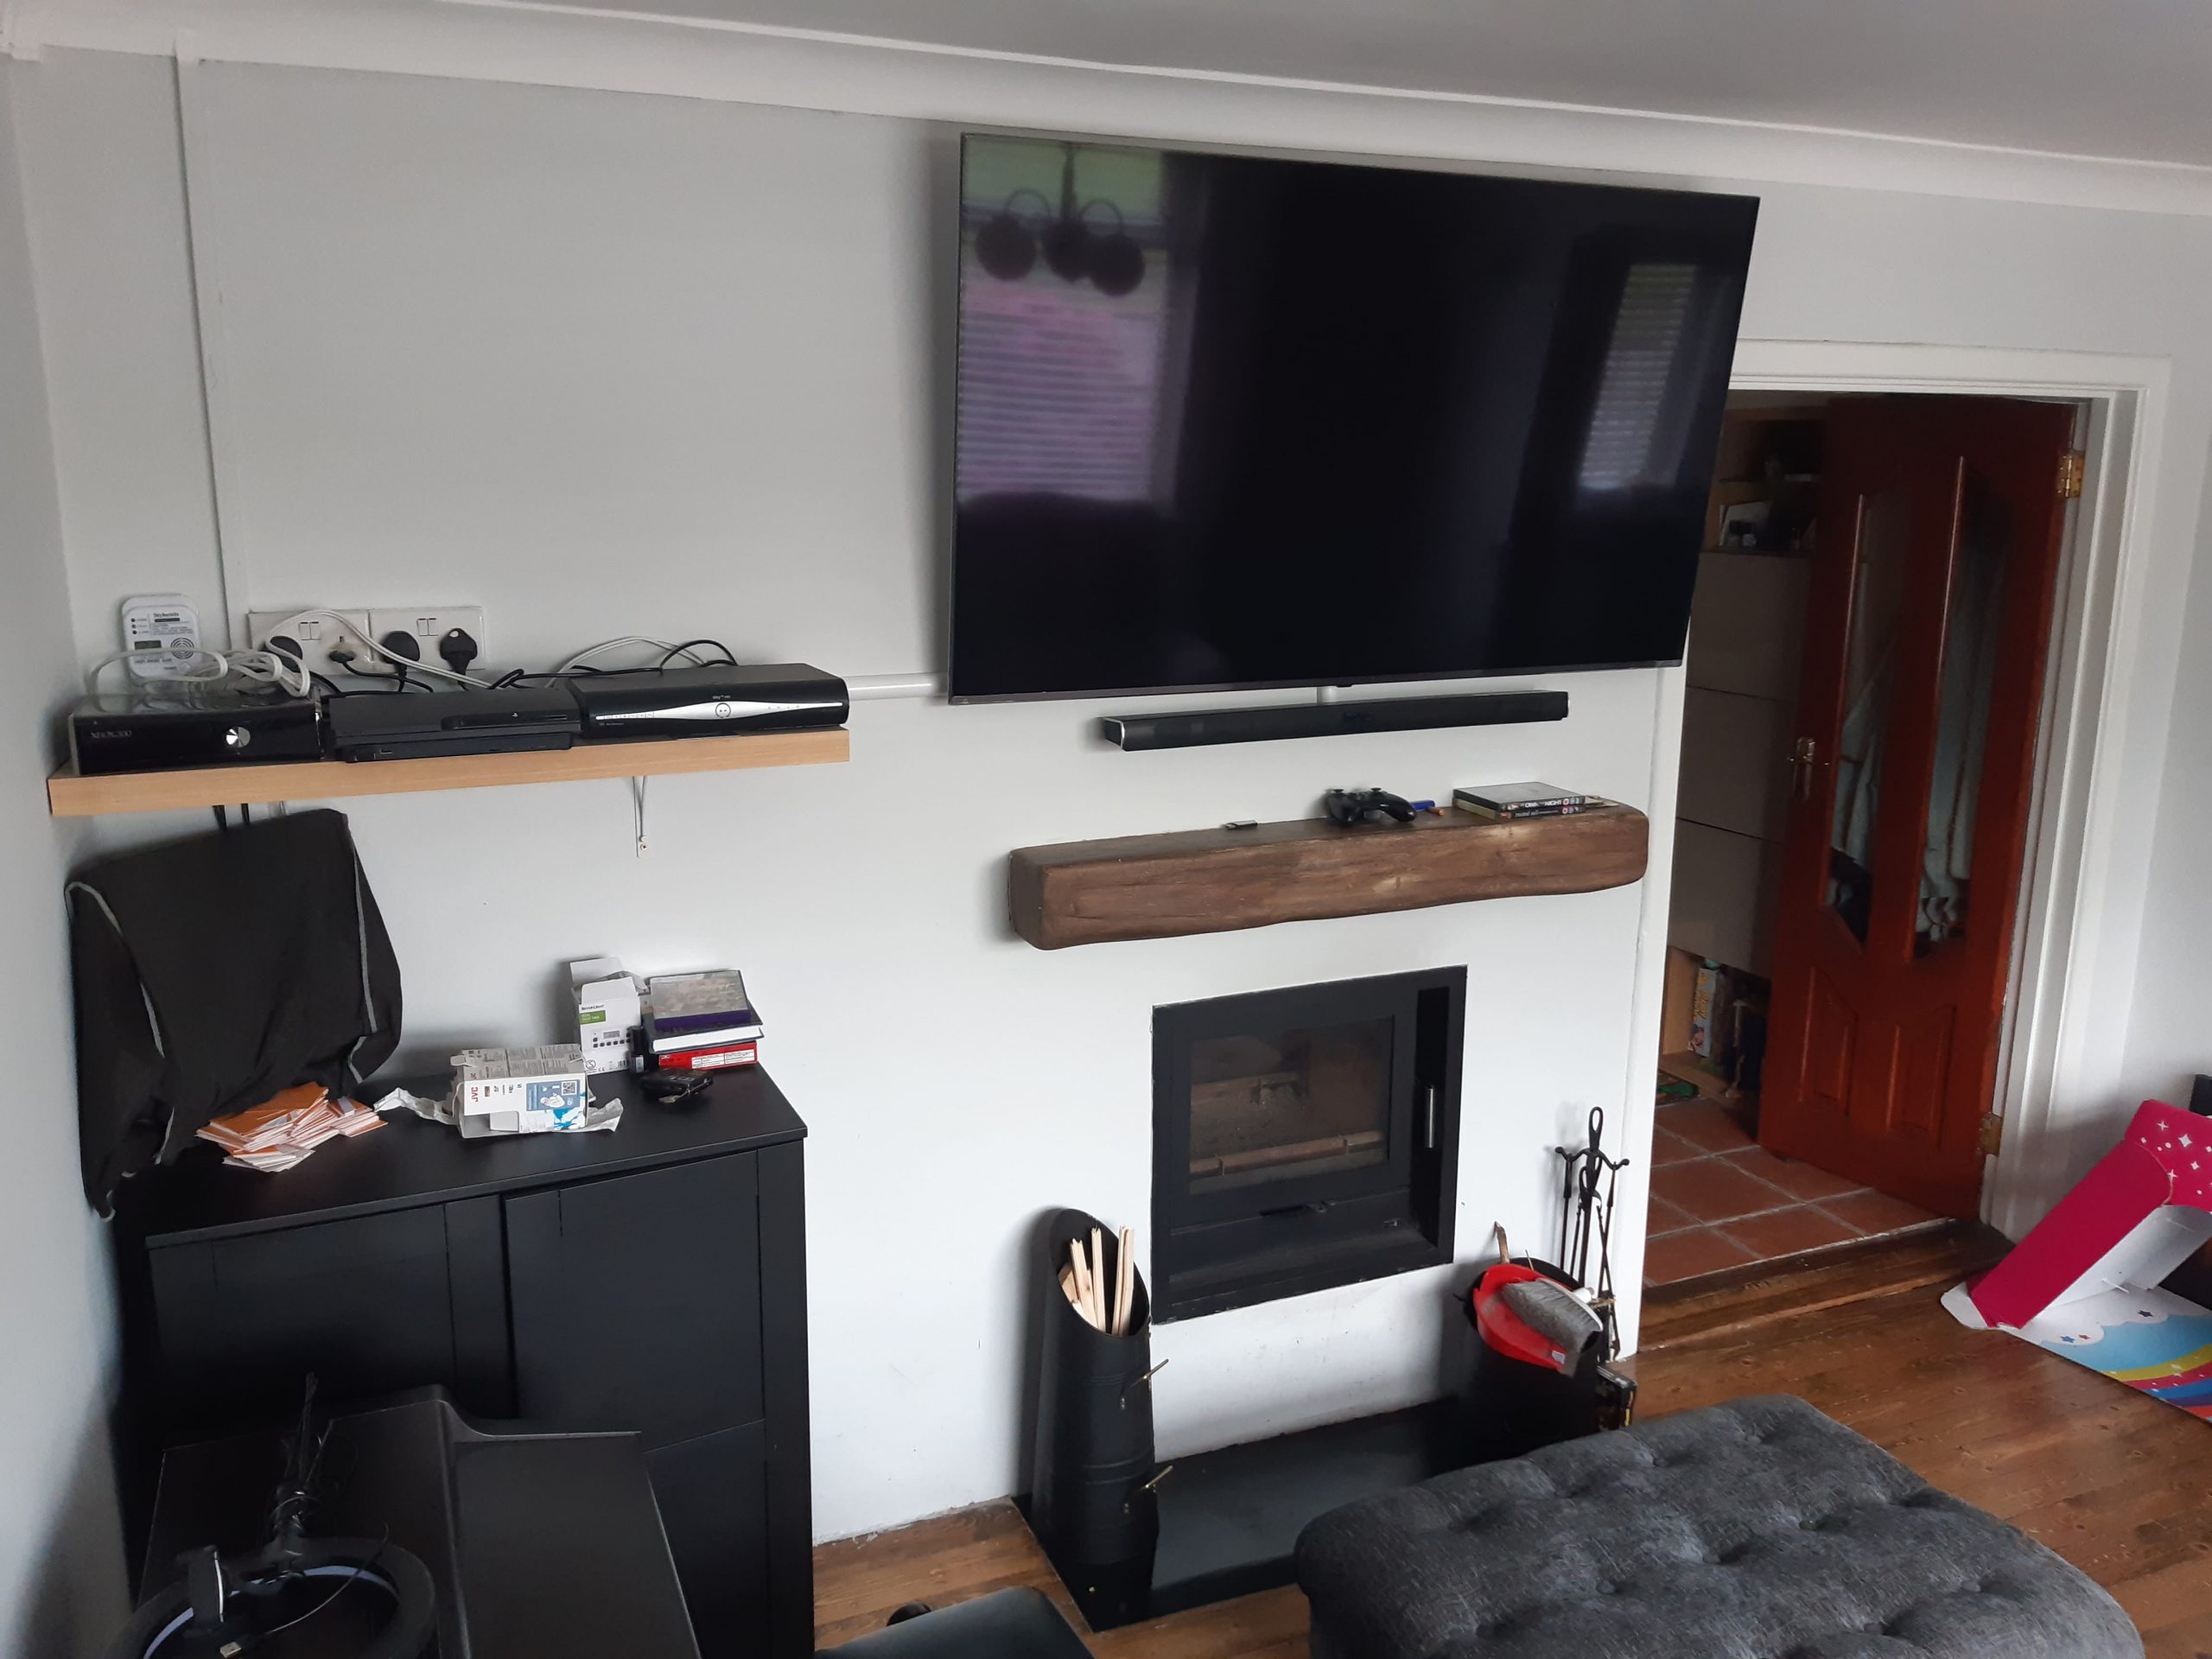 TV Over Fire Place. Can you hang a TV wall bracket above a fire? A recent case study shows that you can, but there are some buts...